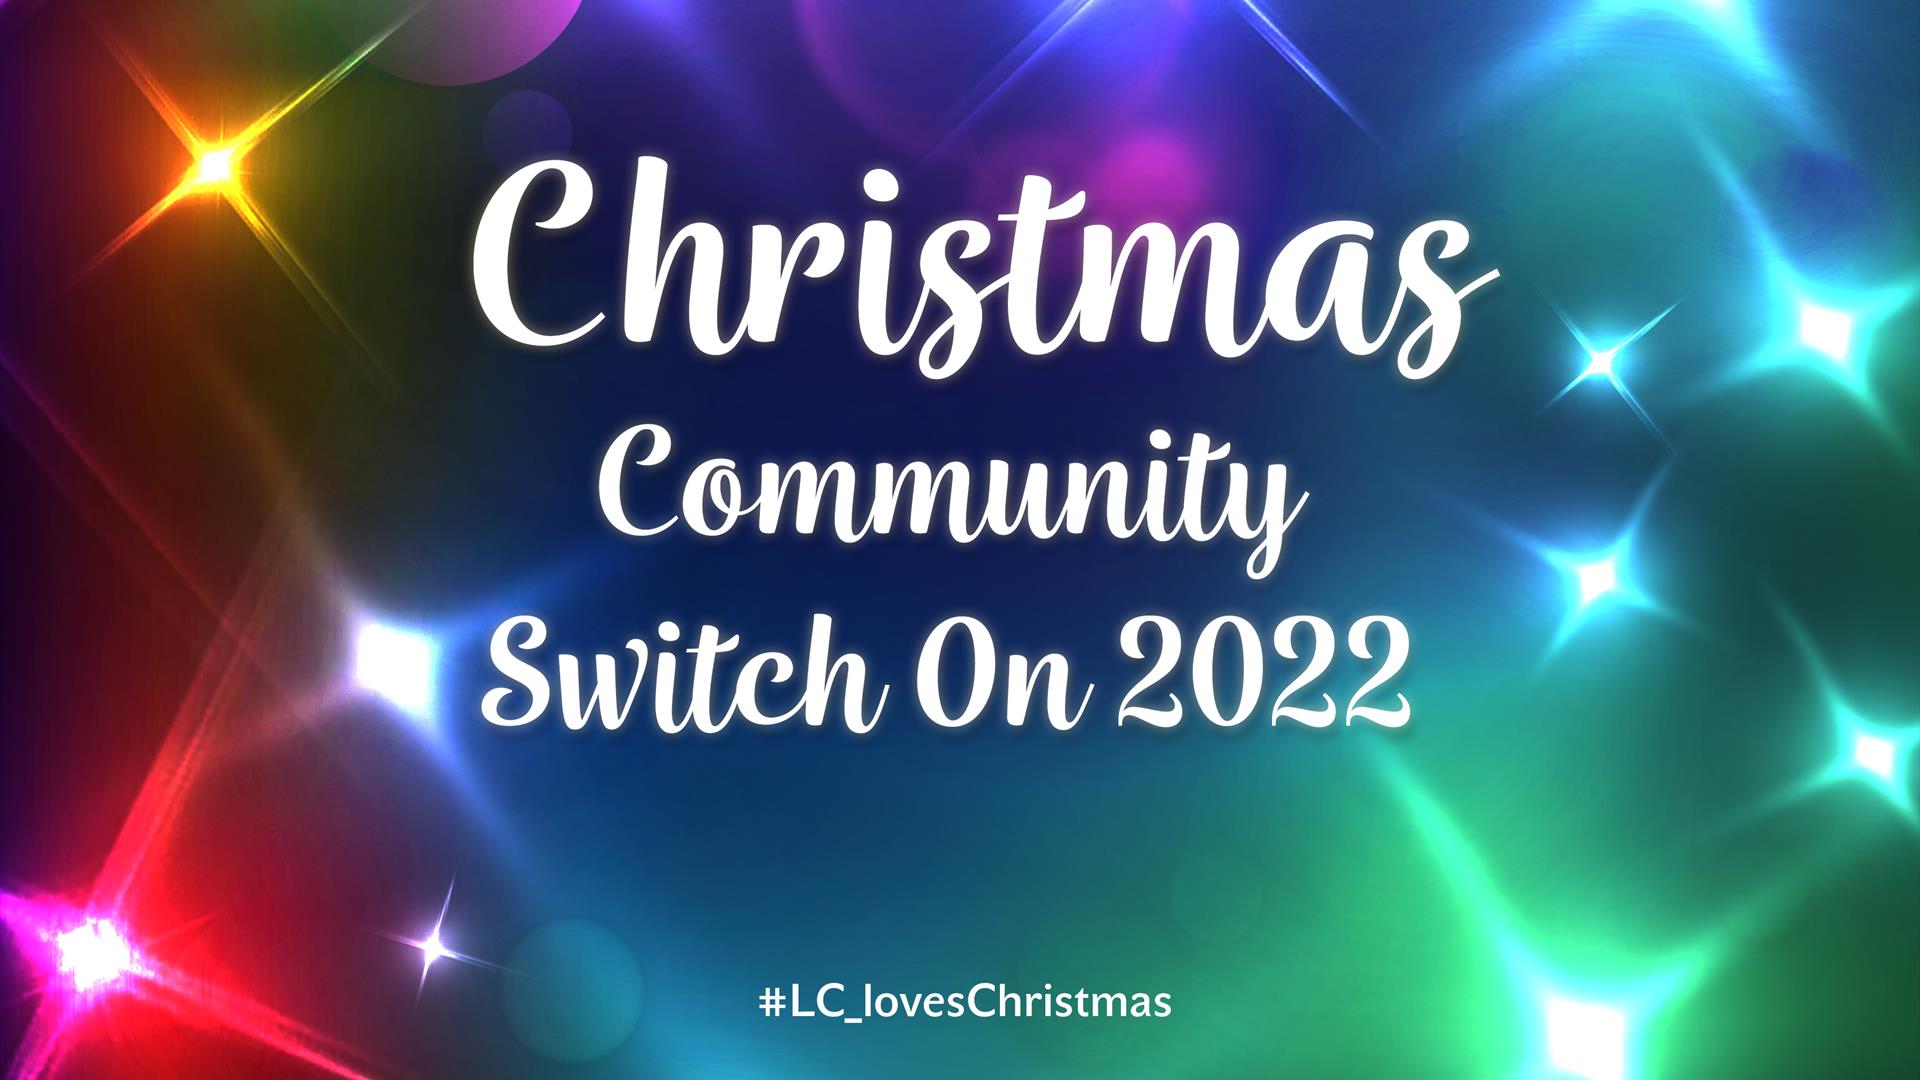 A Poster image with brightly coloured lights with words in centre 'Christmas Community Switch On 2022